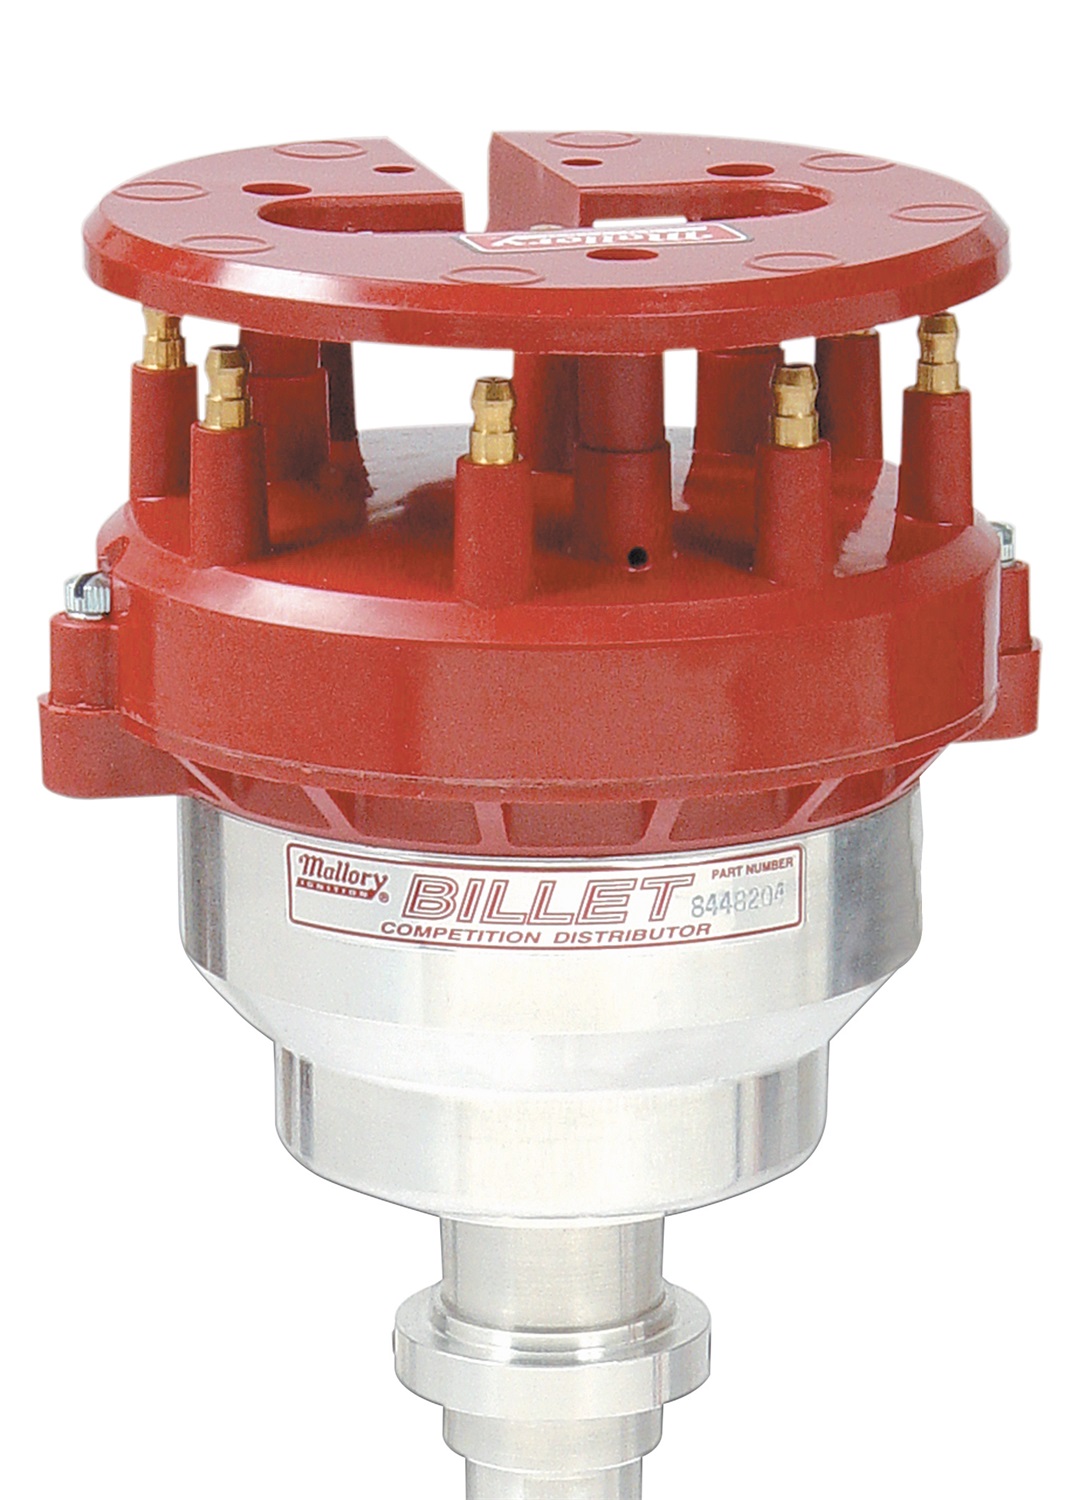 Mallory Mallory 8479005 84 Series; Billet Competition Distributor